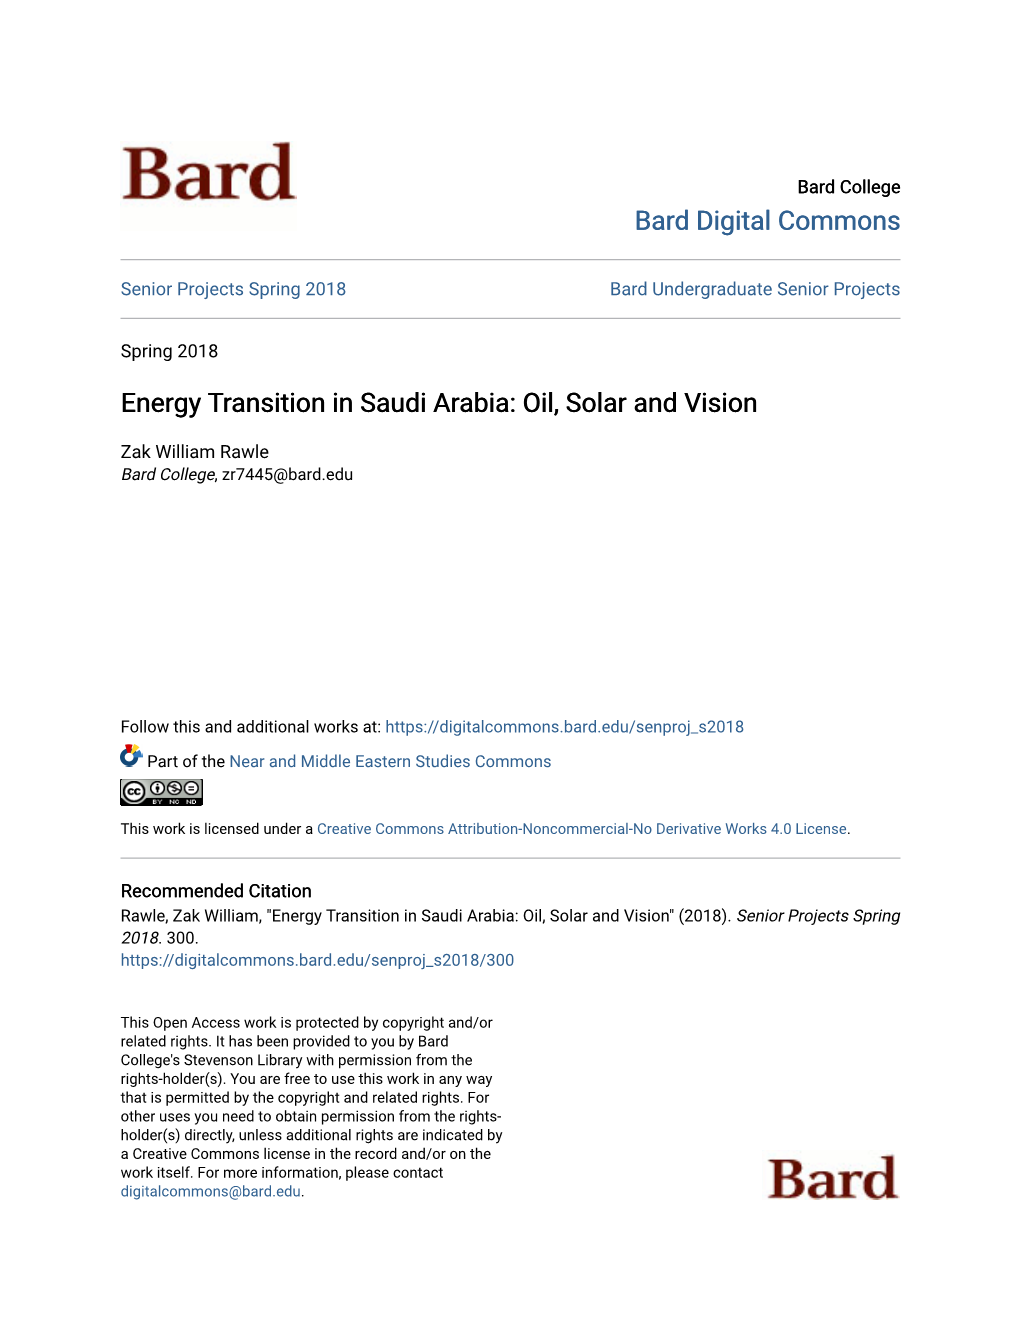 Energy Transition in Saudi Arabia: Oil, Solar and Vision